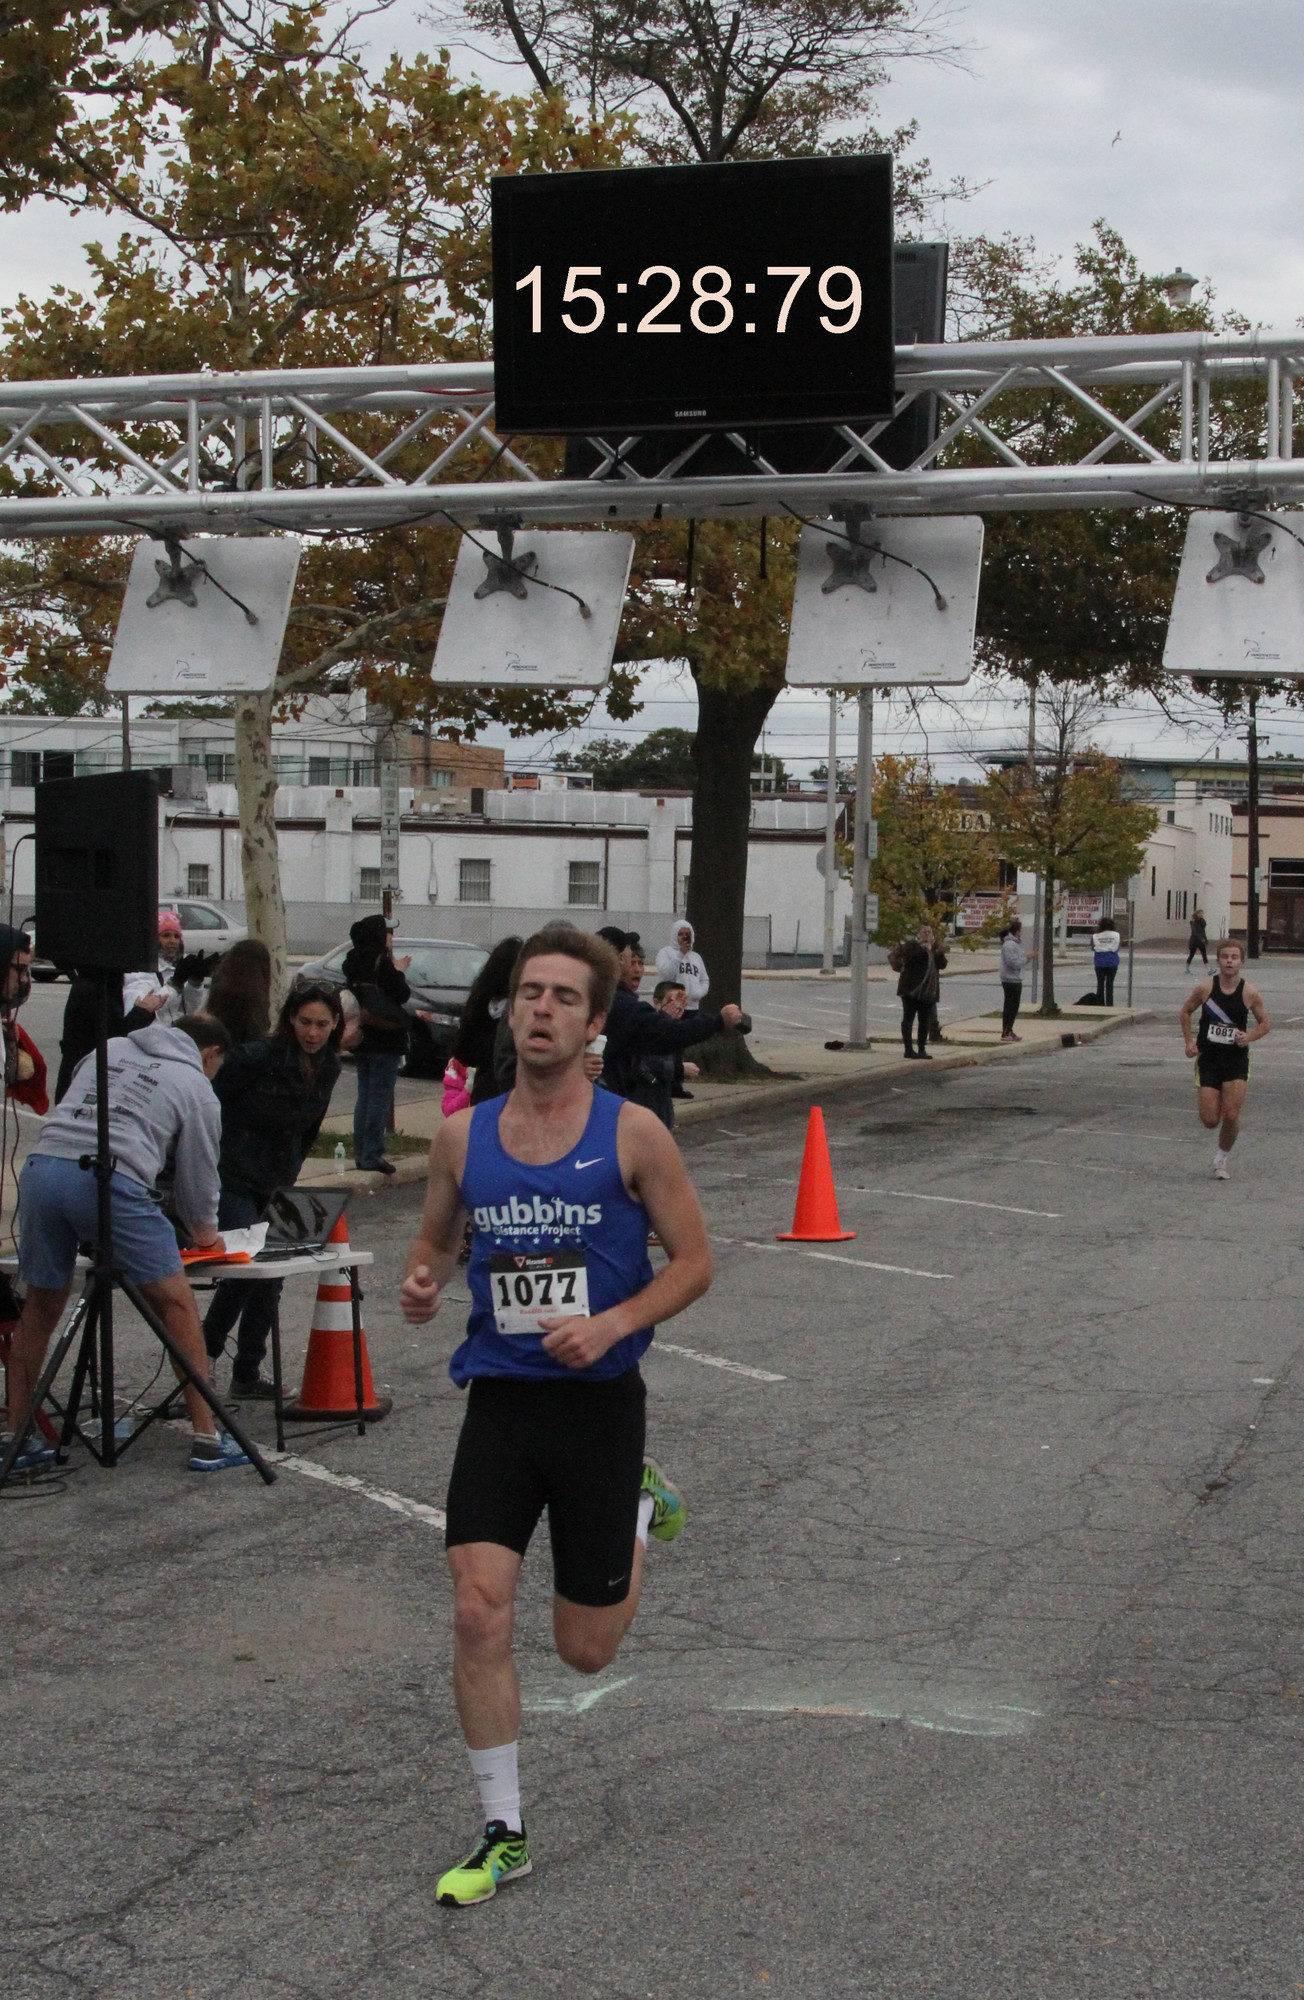 Kevin Harvey was the first runner to cross finish line with a time of 15:28:79.